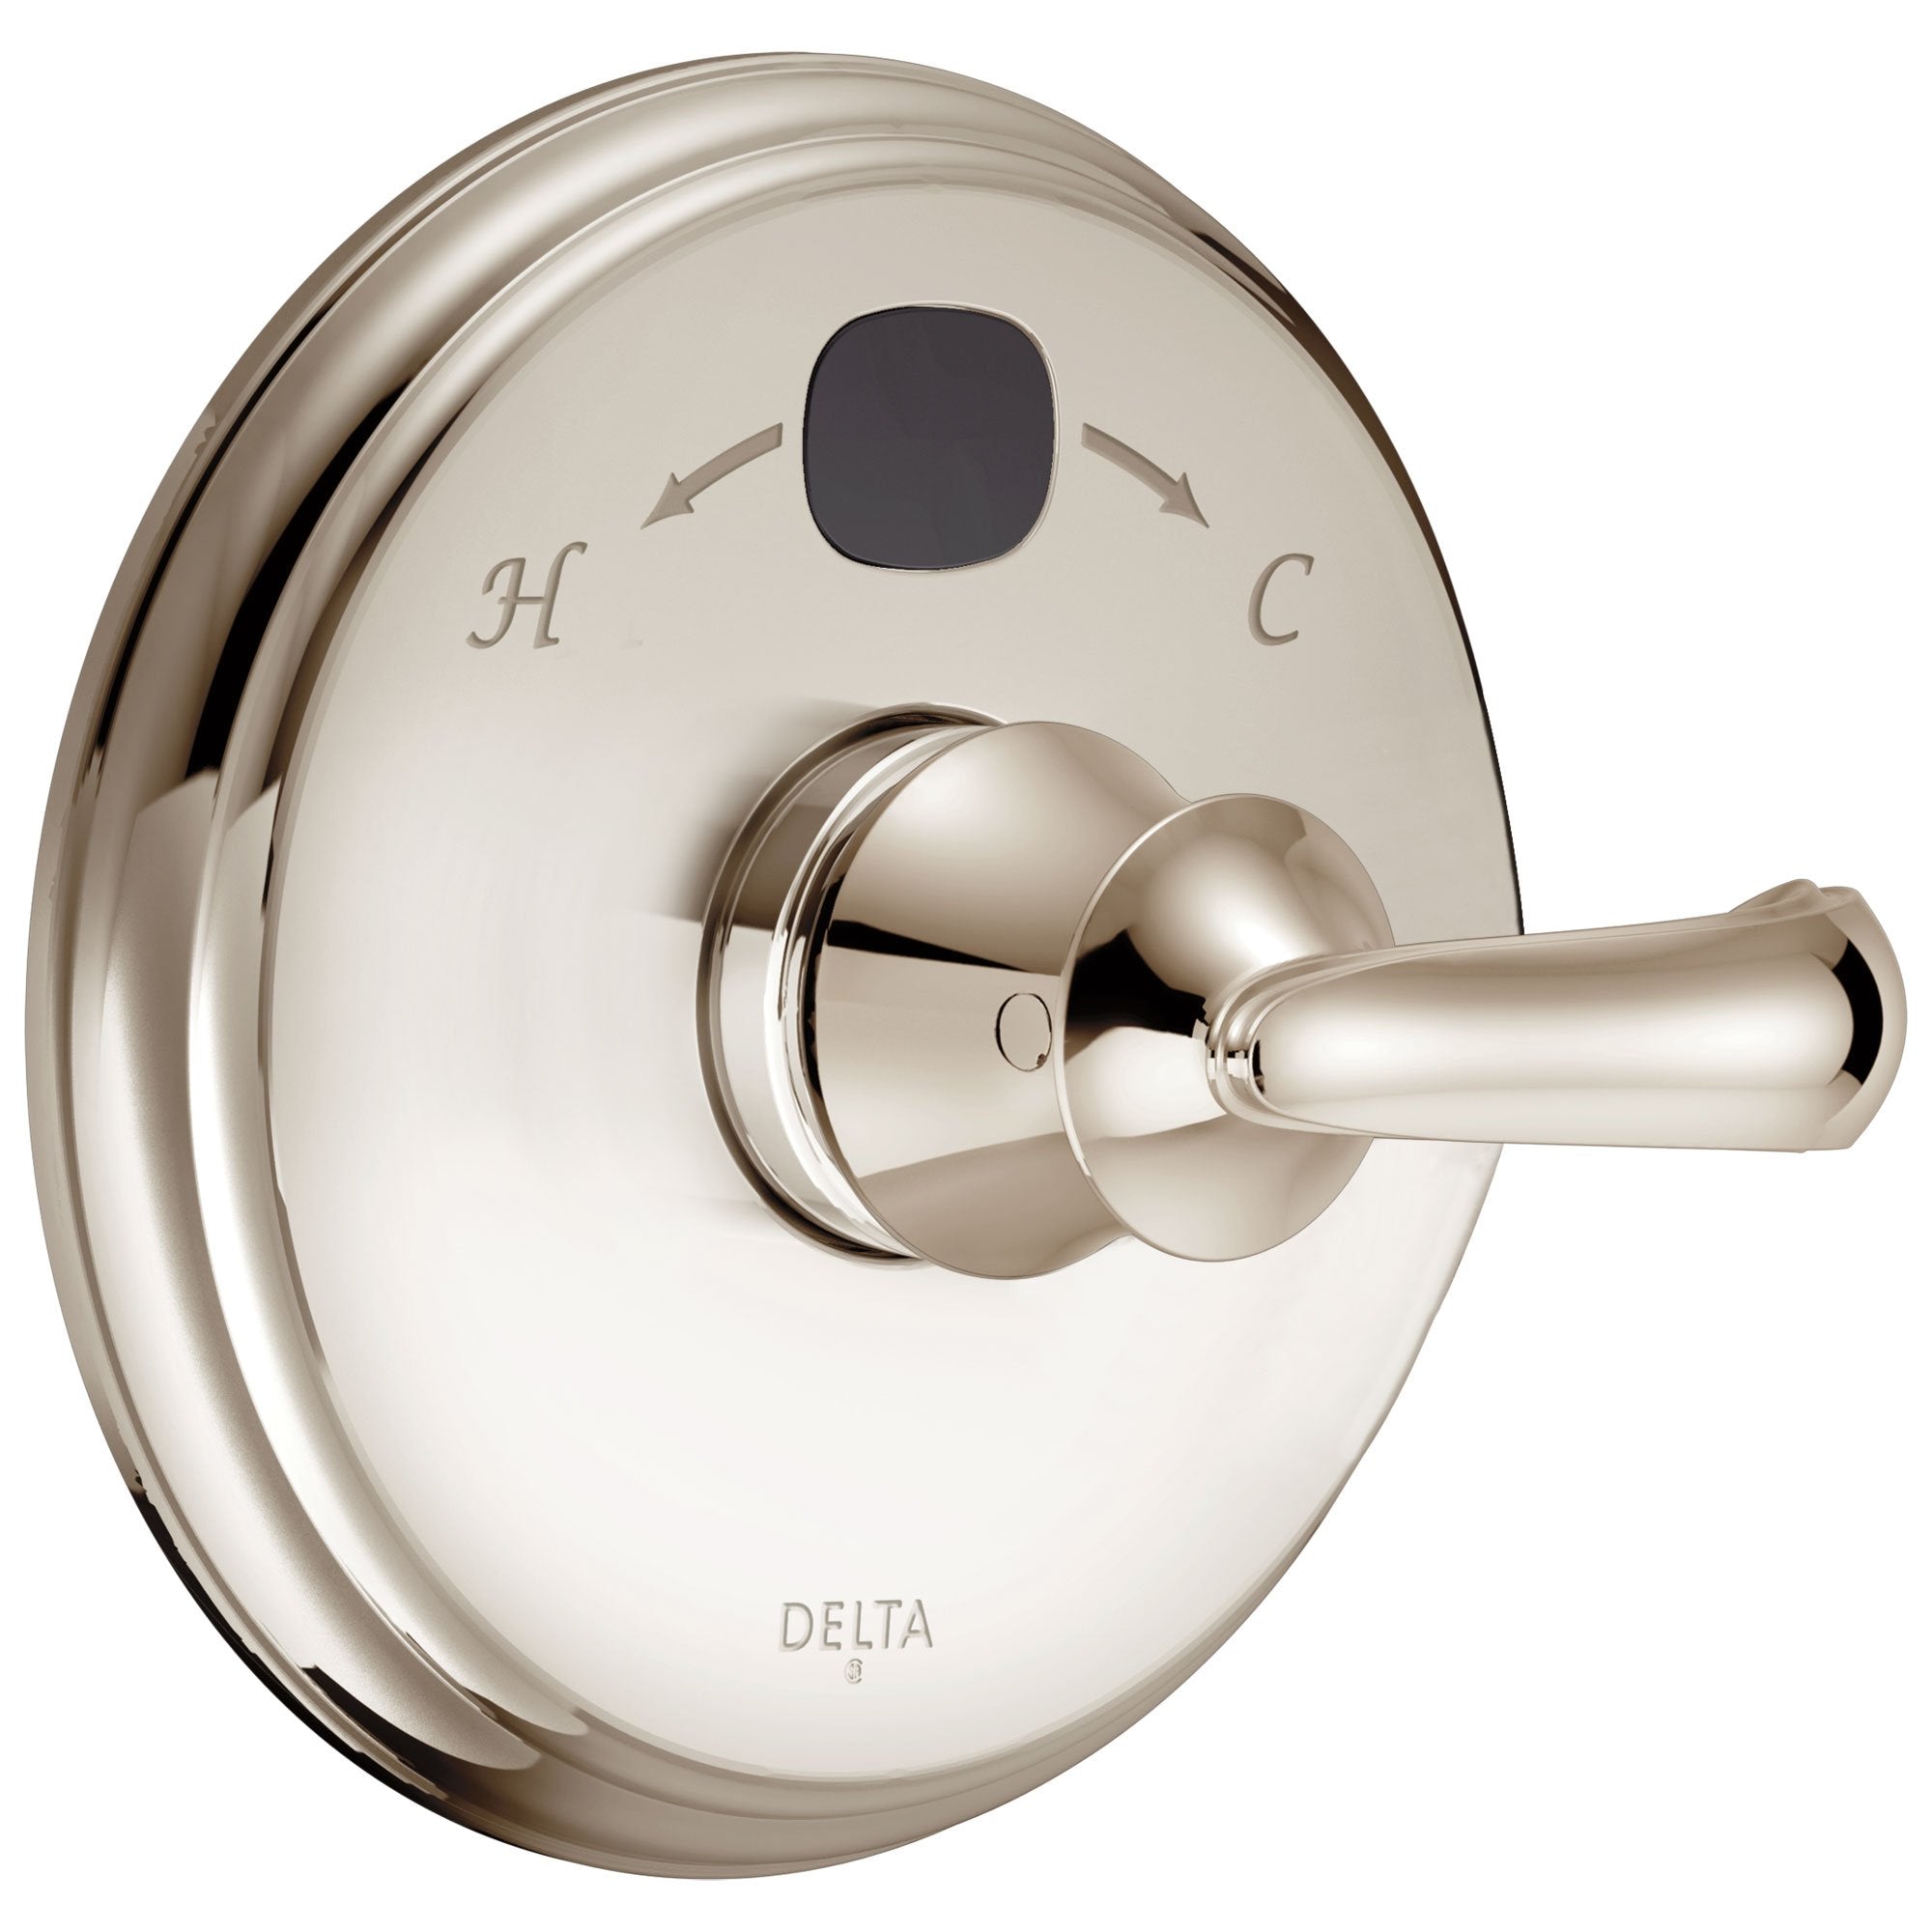 Delta Polished Nickel Cassidy 14 Series Digital Display Temp2O Shower Valve Control COMPLETE with Single French Curve Lever Handle and Valve with Stops D1683V